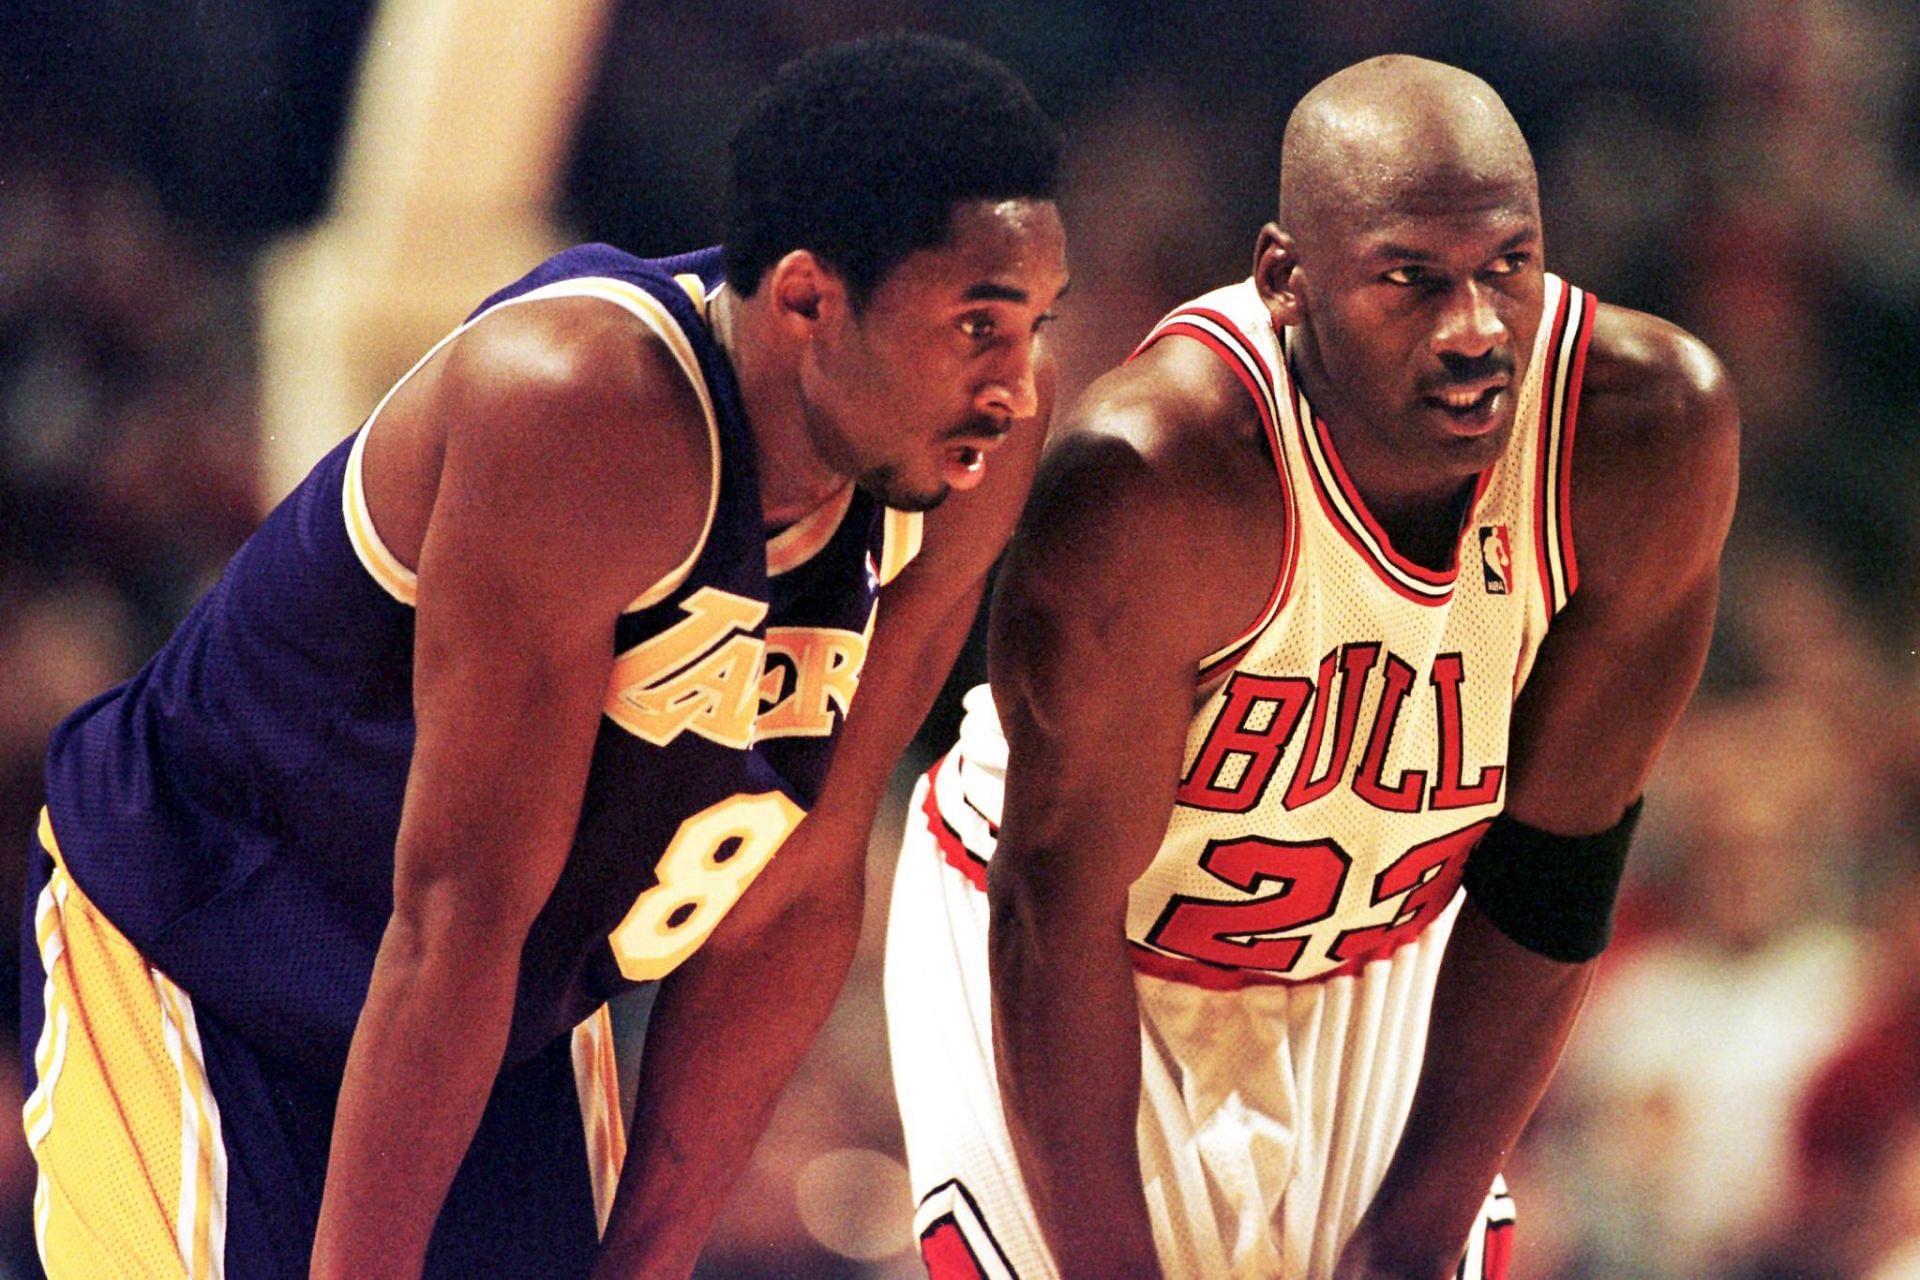 NBA legends Kobe Bryant and Michael Jordan on the court together.